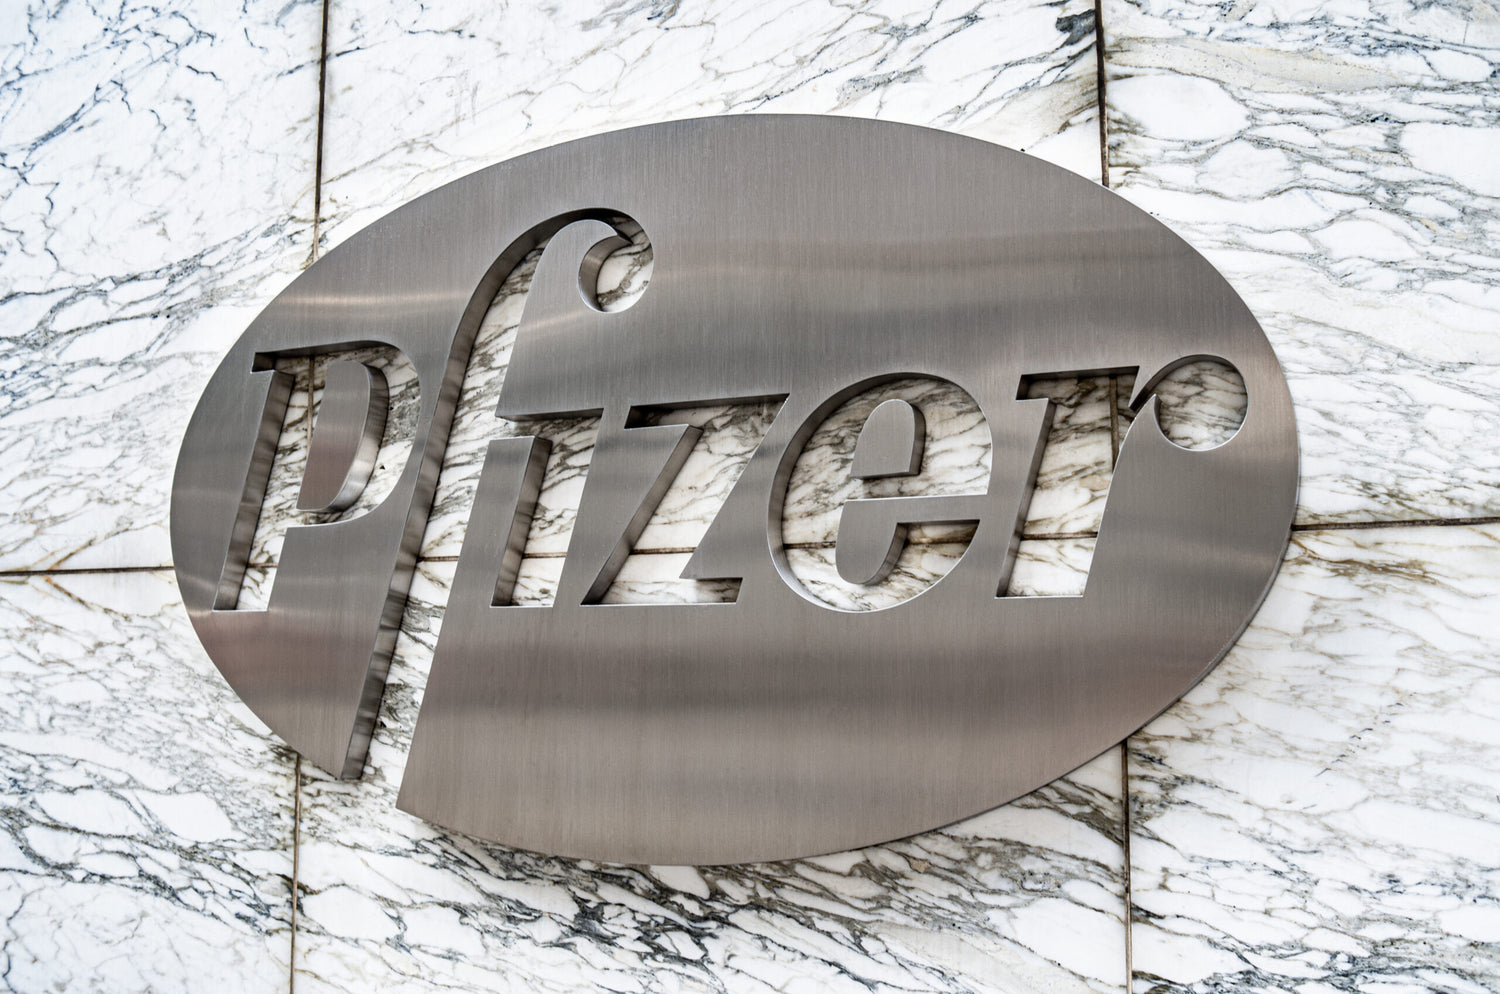 Pfizer To Join The Cannabis Industry With Its New Acquisition Of Arena Pharmaceuticals